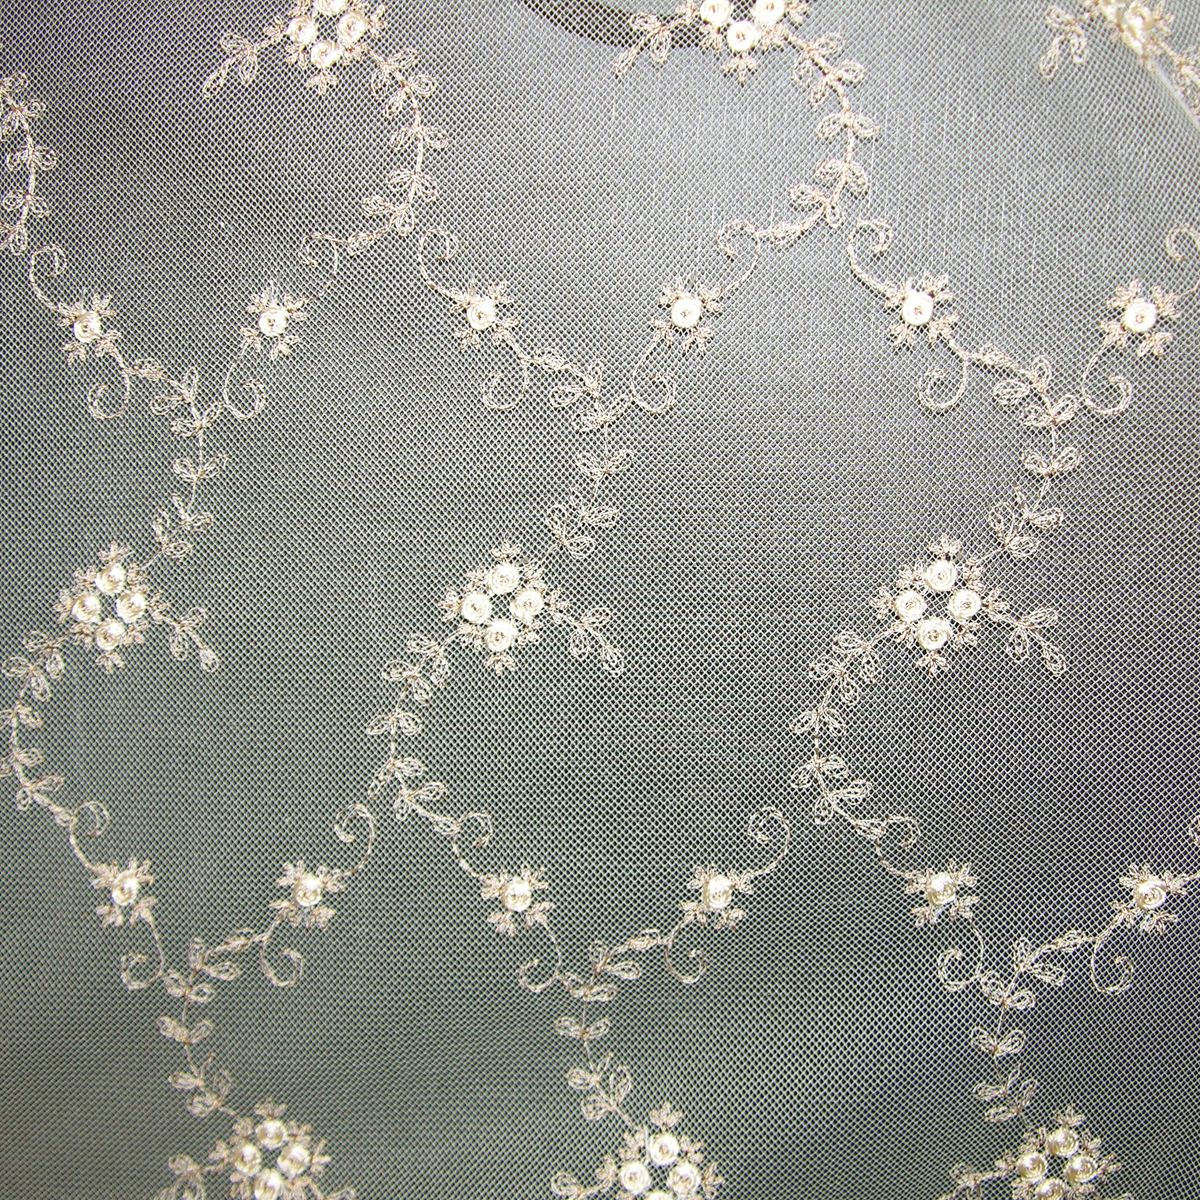 Florinette Sheer fabric in froth color - pattern number AU 41648075 - by Scalamandre in the Old World Weavers collection